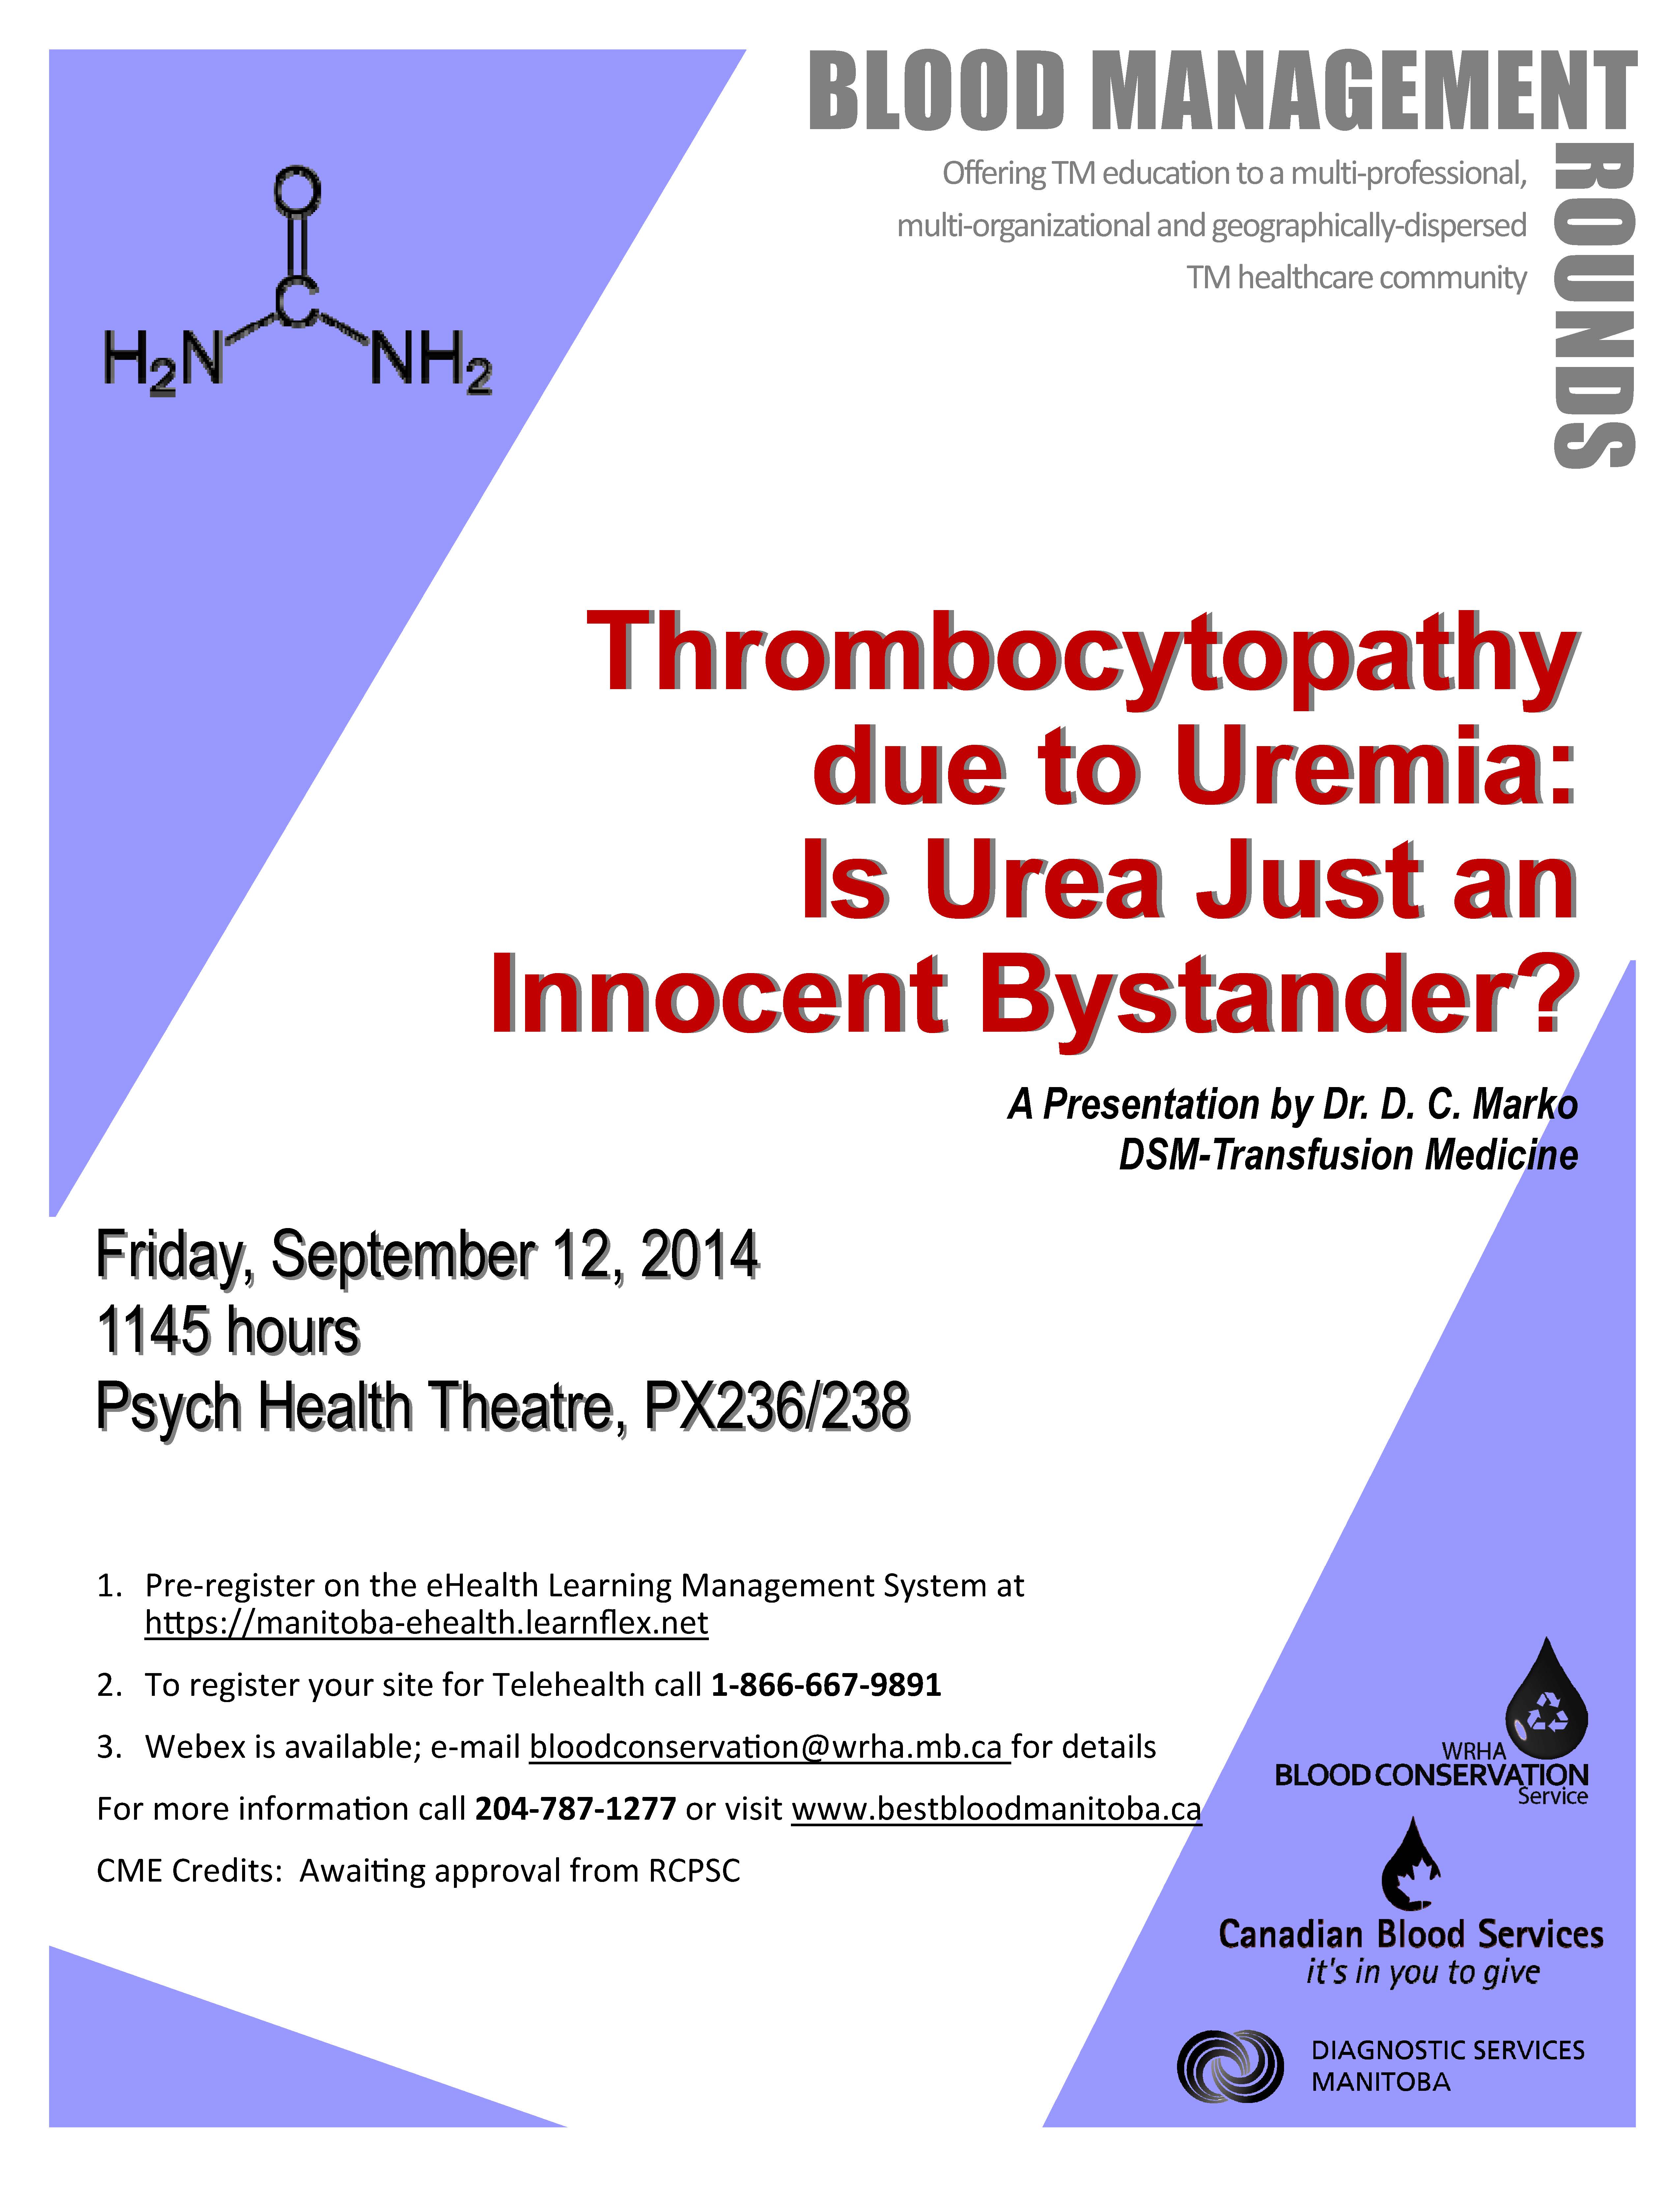 Thrombocytopathy due to Uremia: Is urea just an innocent bystander?